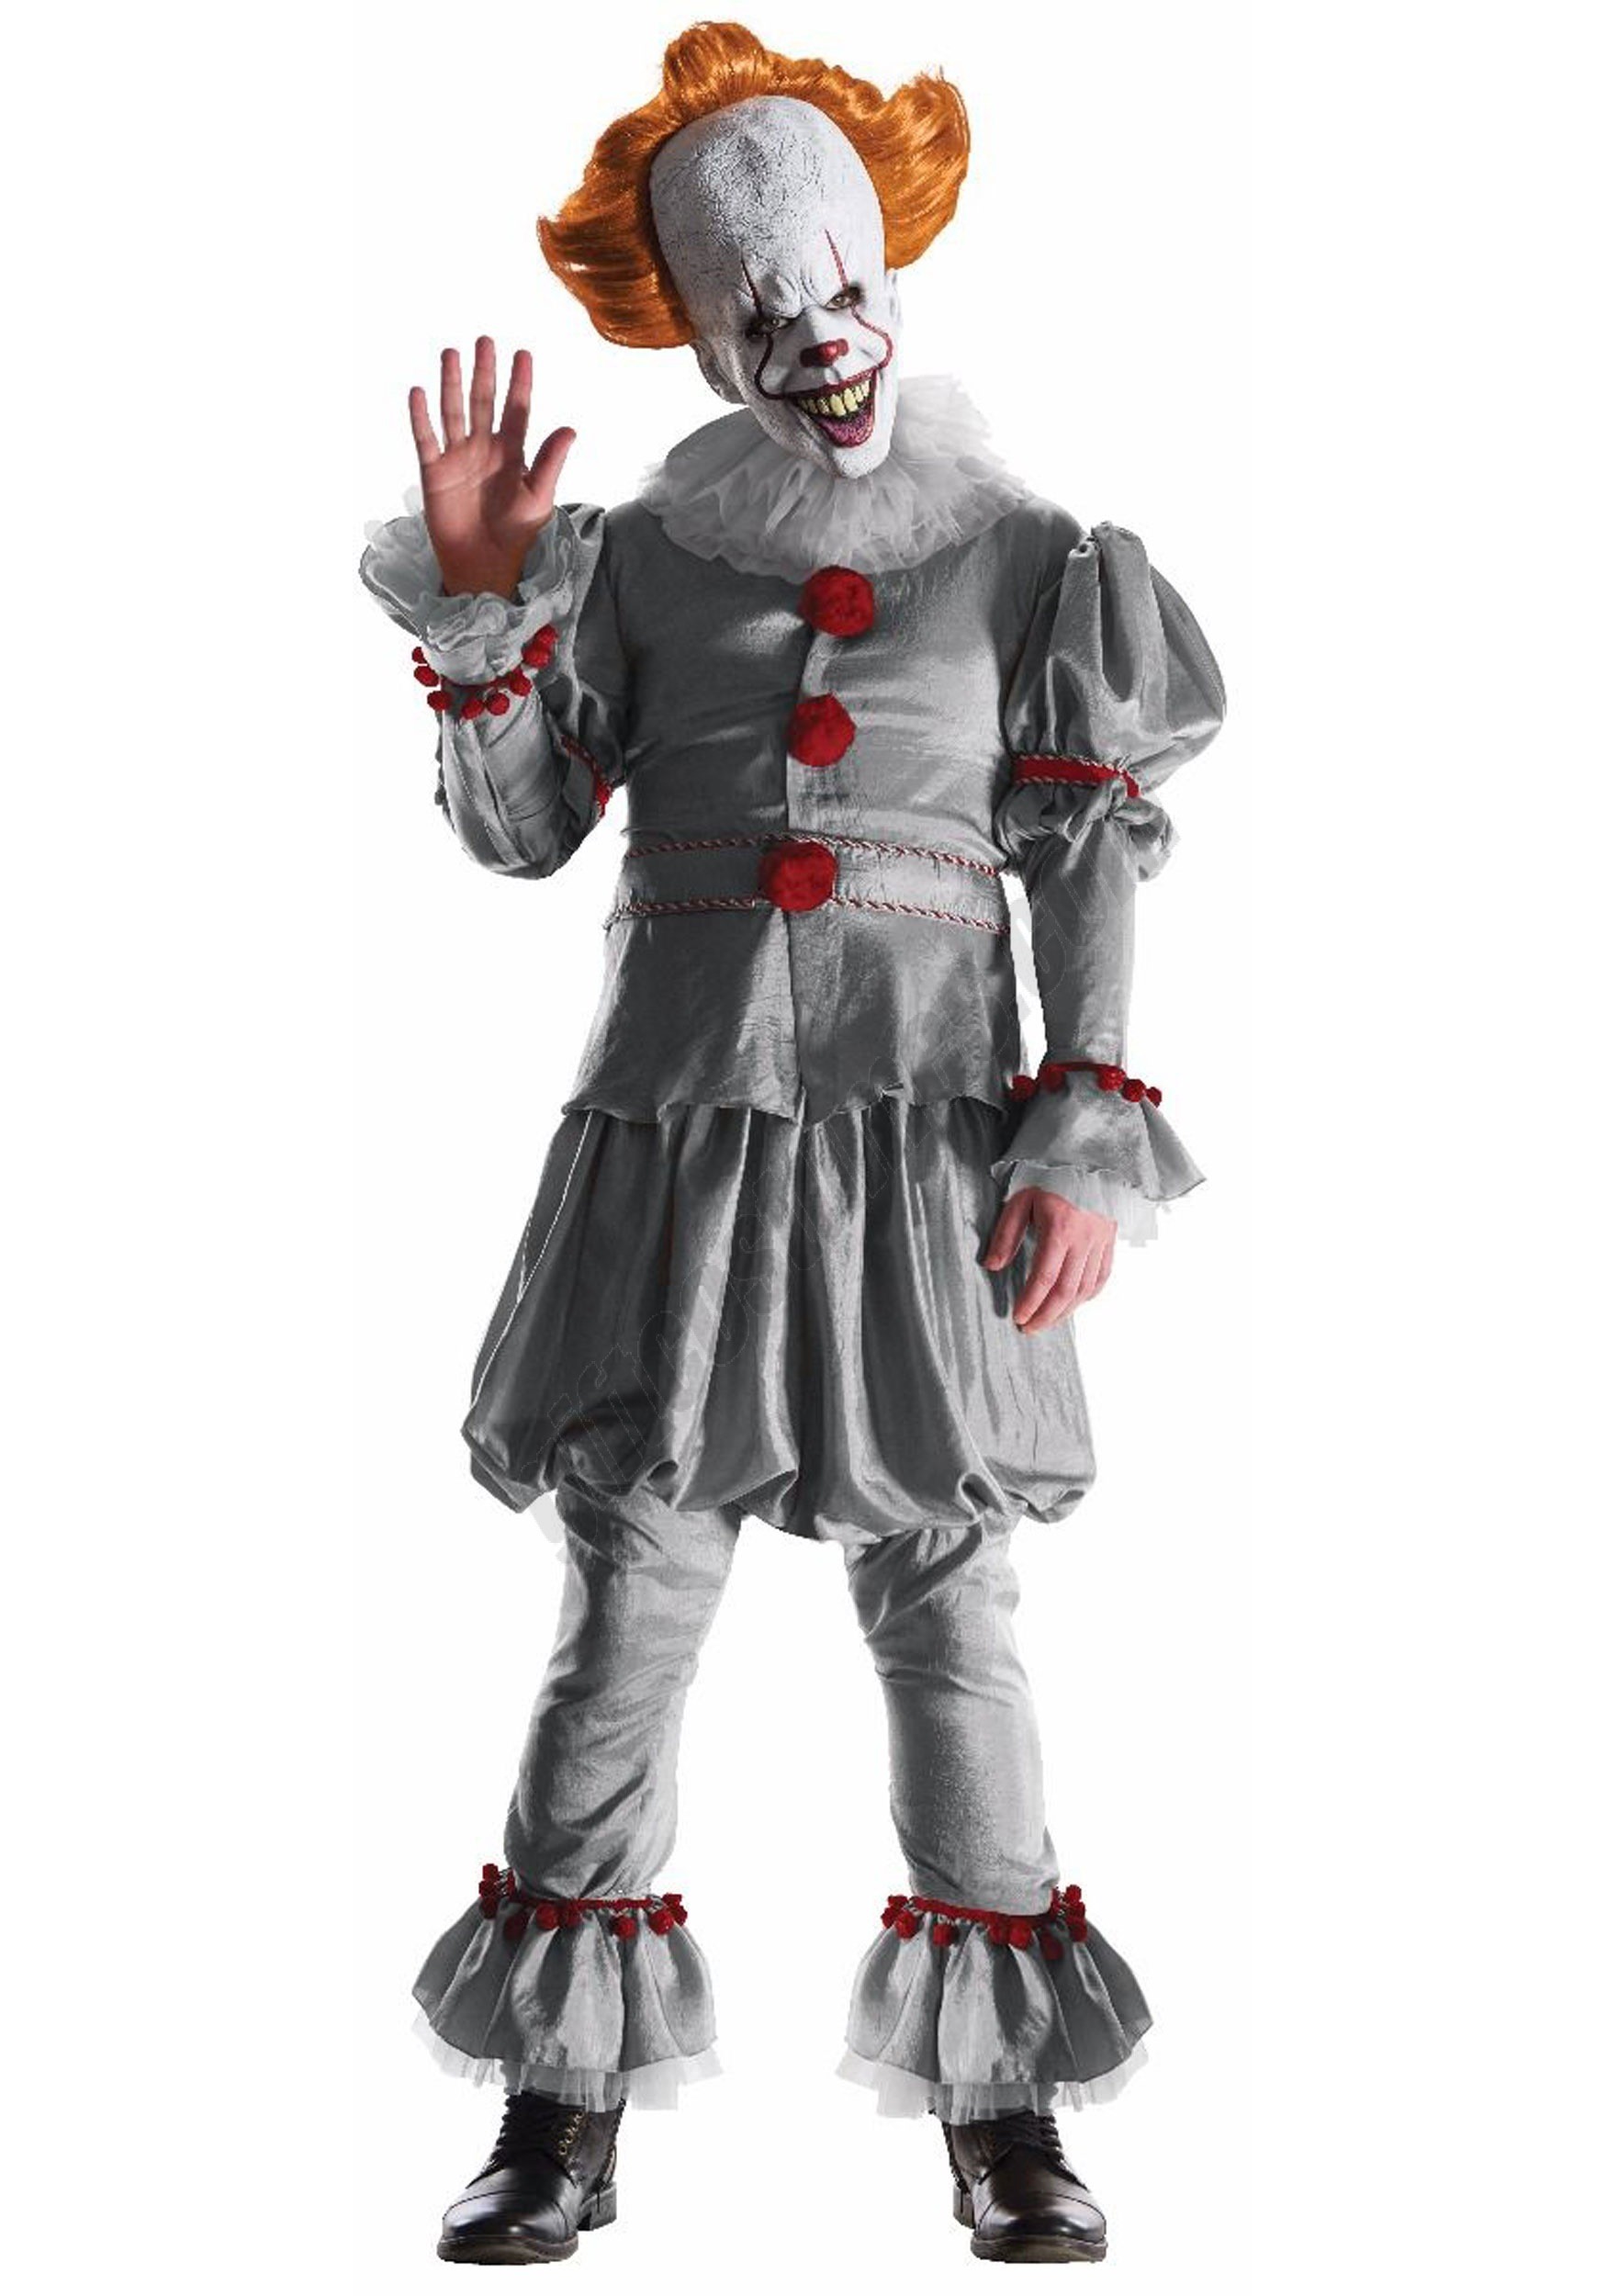 Grand Heritage Pennywise Movie Adult Costume - Men's - Grand Heritage Pennywise Movie Adult Costume - Men's